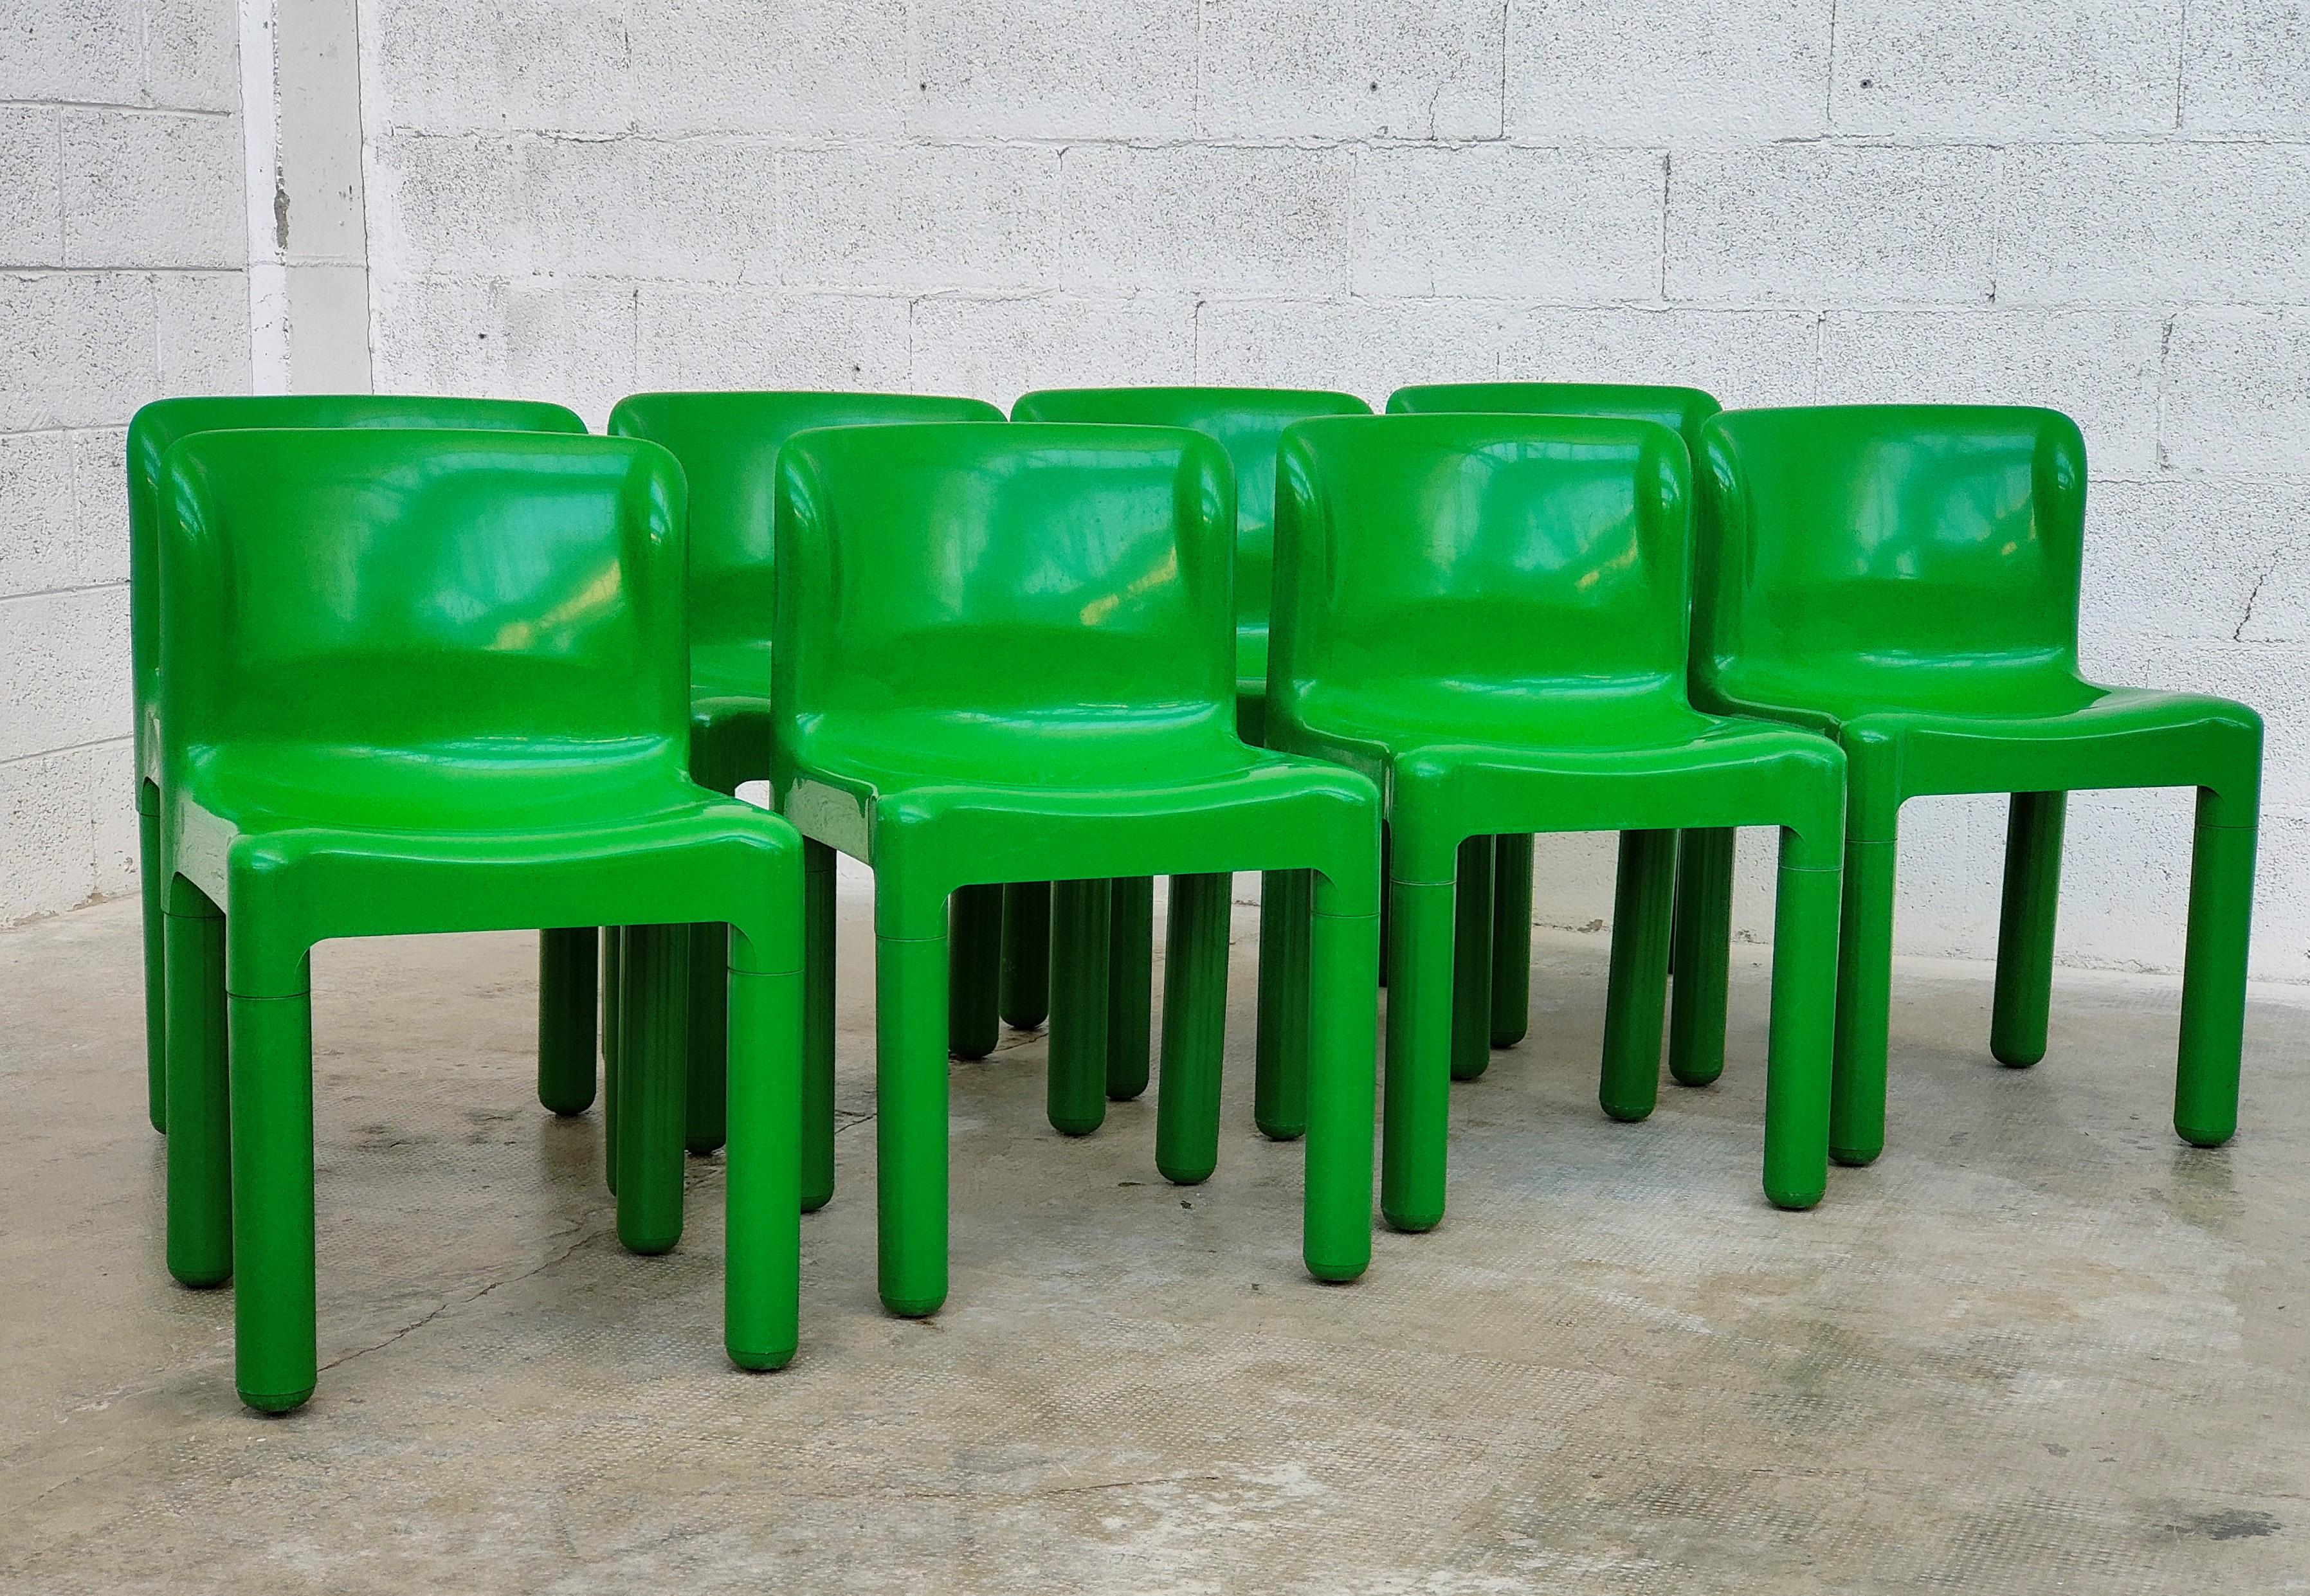 Oustanding and rare set of 8 green plastic chairs 4875 model, designed by Carlo Bartoli and produced by Kartell 1970s. 

In Good condition, wear consistent with age and use.

Dimensions: L 44 cm - D 42 - H 74/43.